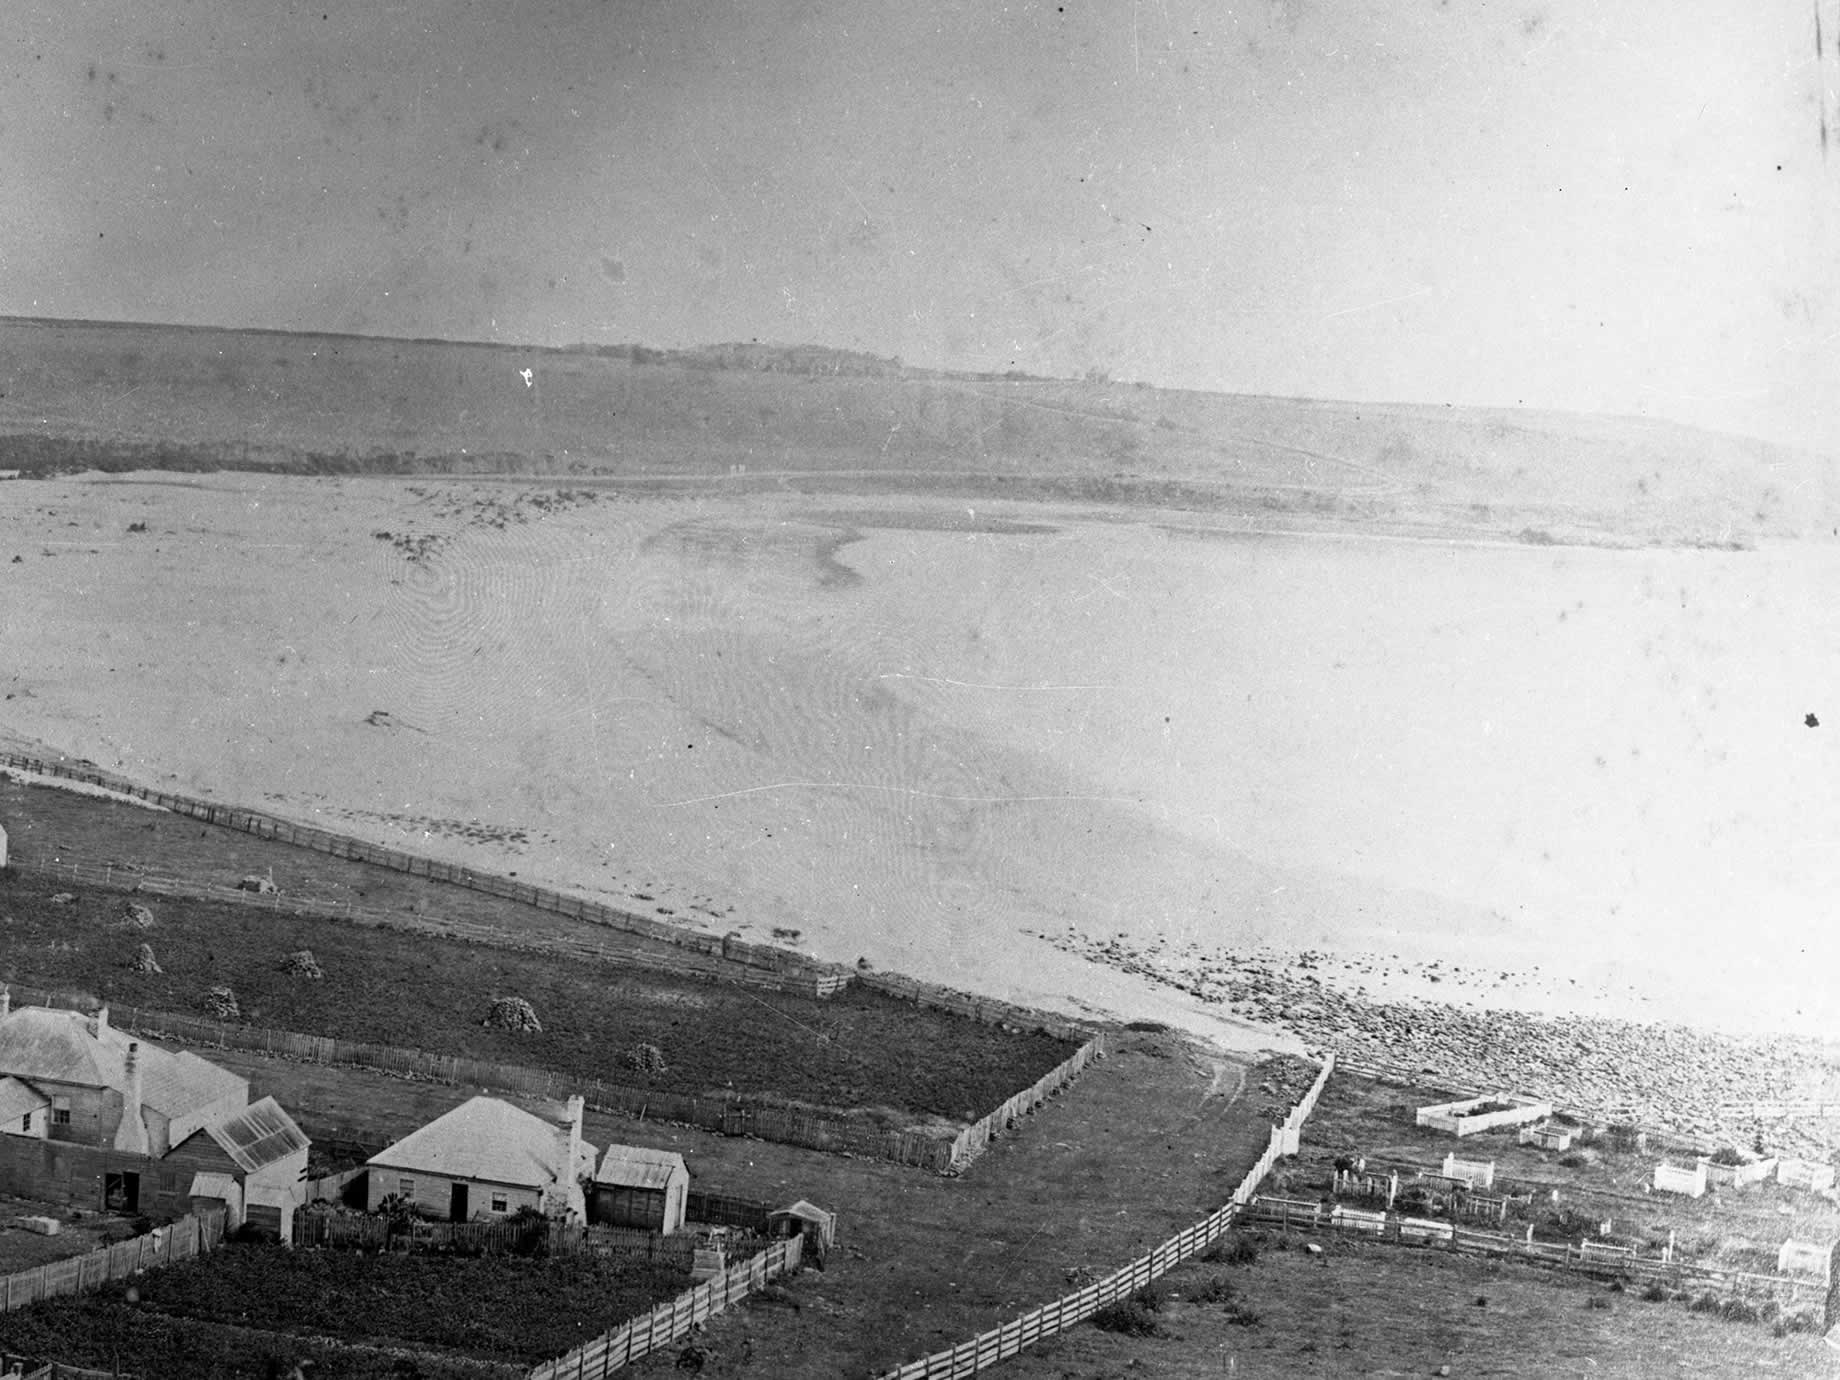 An aerial view of the Stanley Burial Ground near Godfrey’s beach